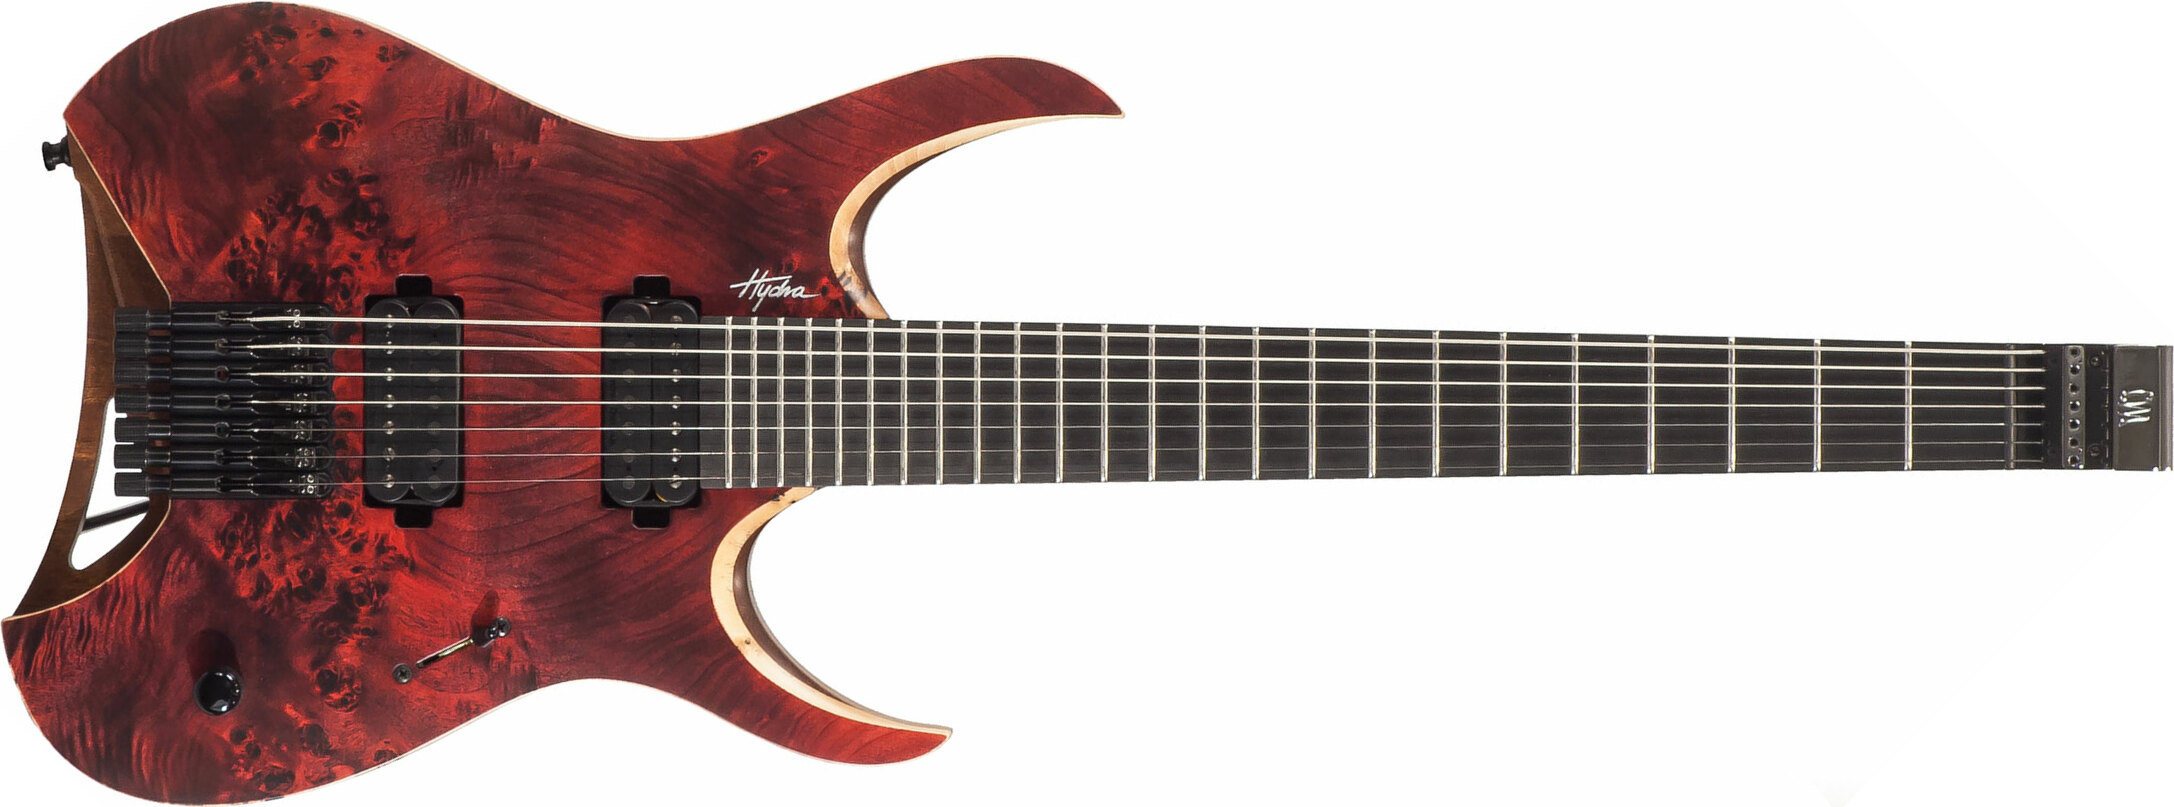 Mayones Guitars Hydra Elite 7 2h Seymour Duncan Ht Eb - Dirty Red Satin - 7 string electric guitar - Main picture